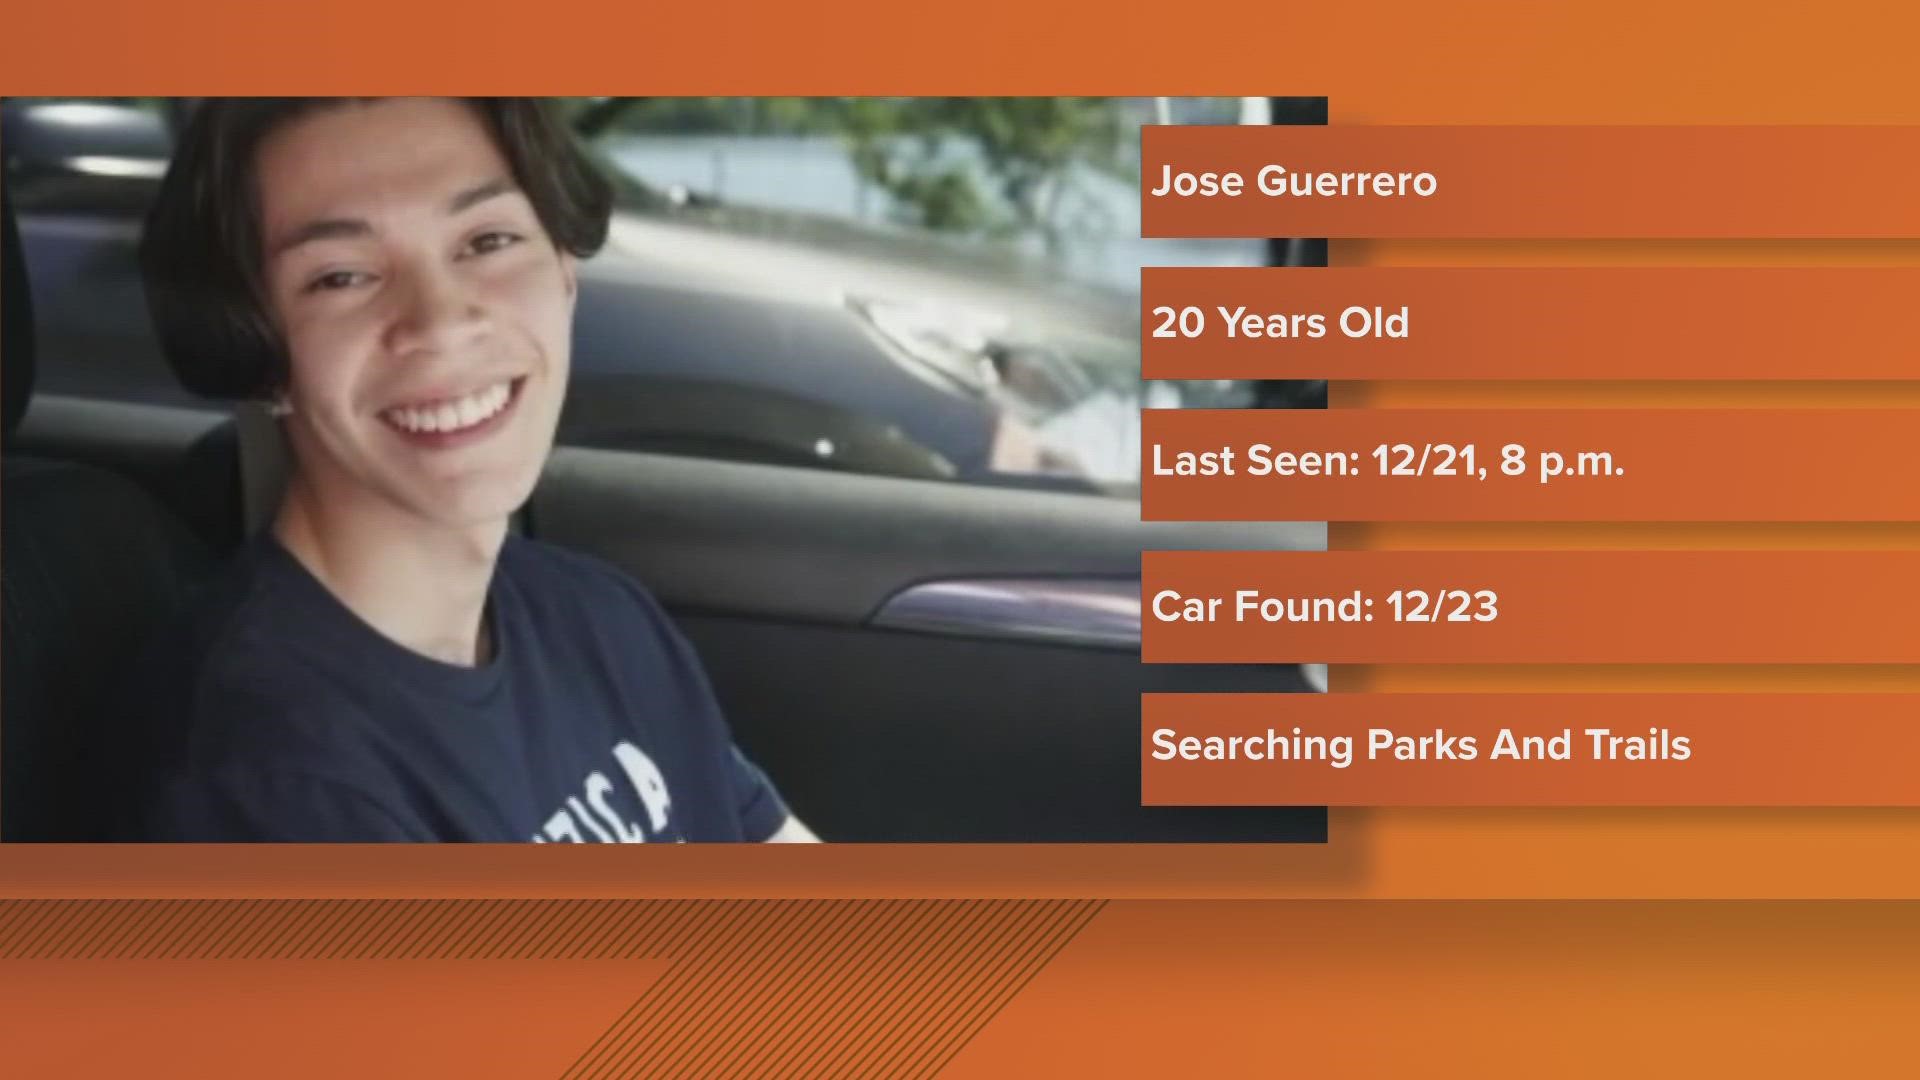 Police say Jose Guerrero left home and told his girlfriend he'd be right back in a few minutes.